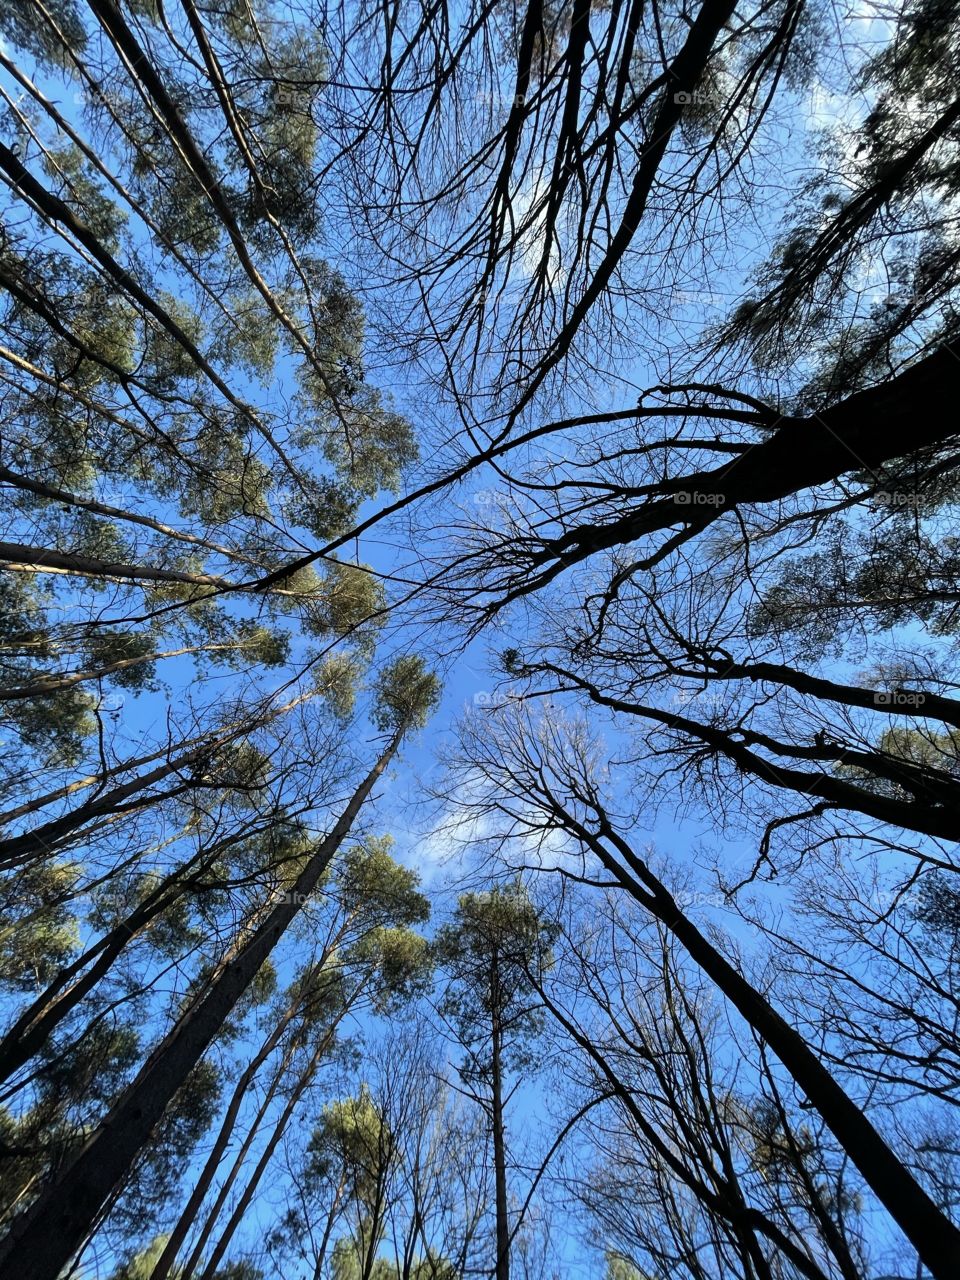 Look up, forest 